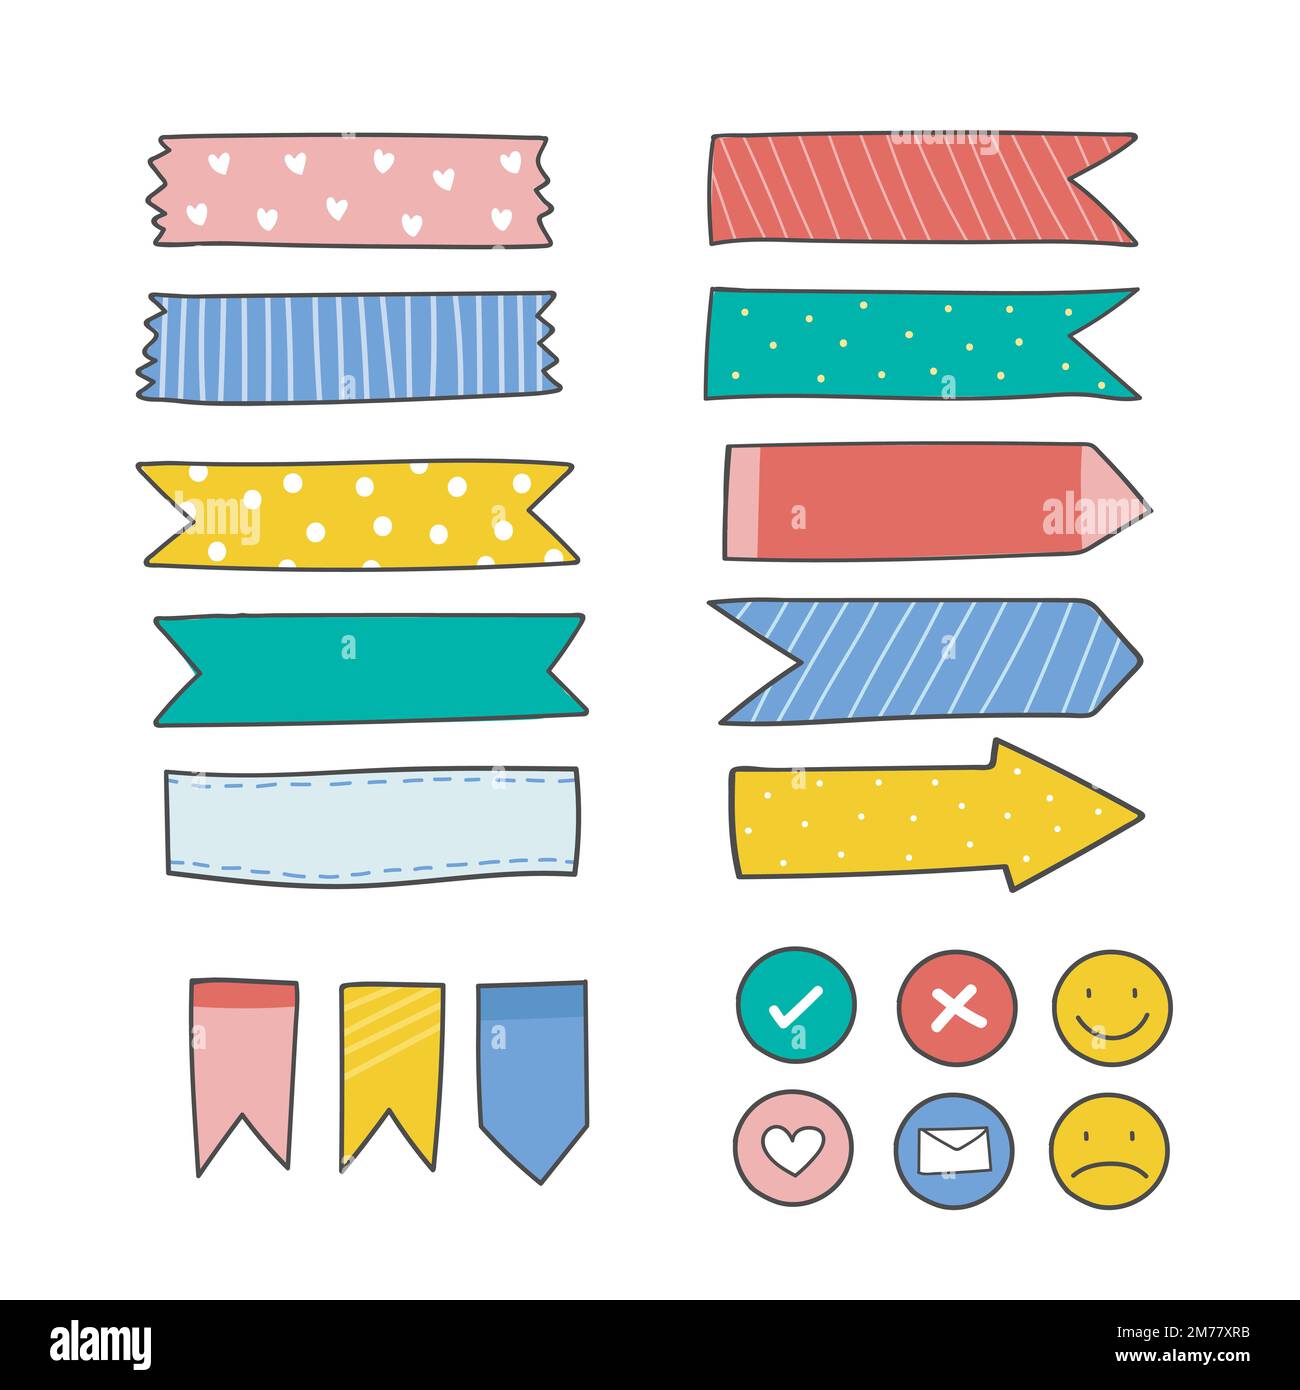 Cute Paper Notes Pastel Colors Stickers Stock Vector (Royalty Free